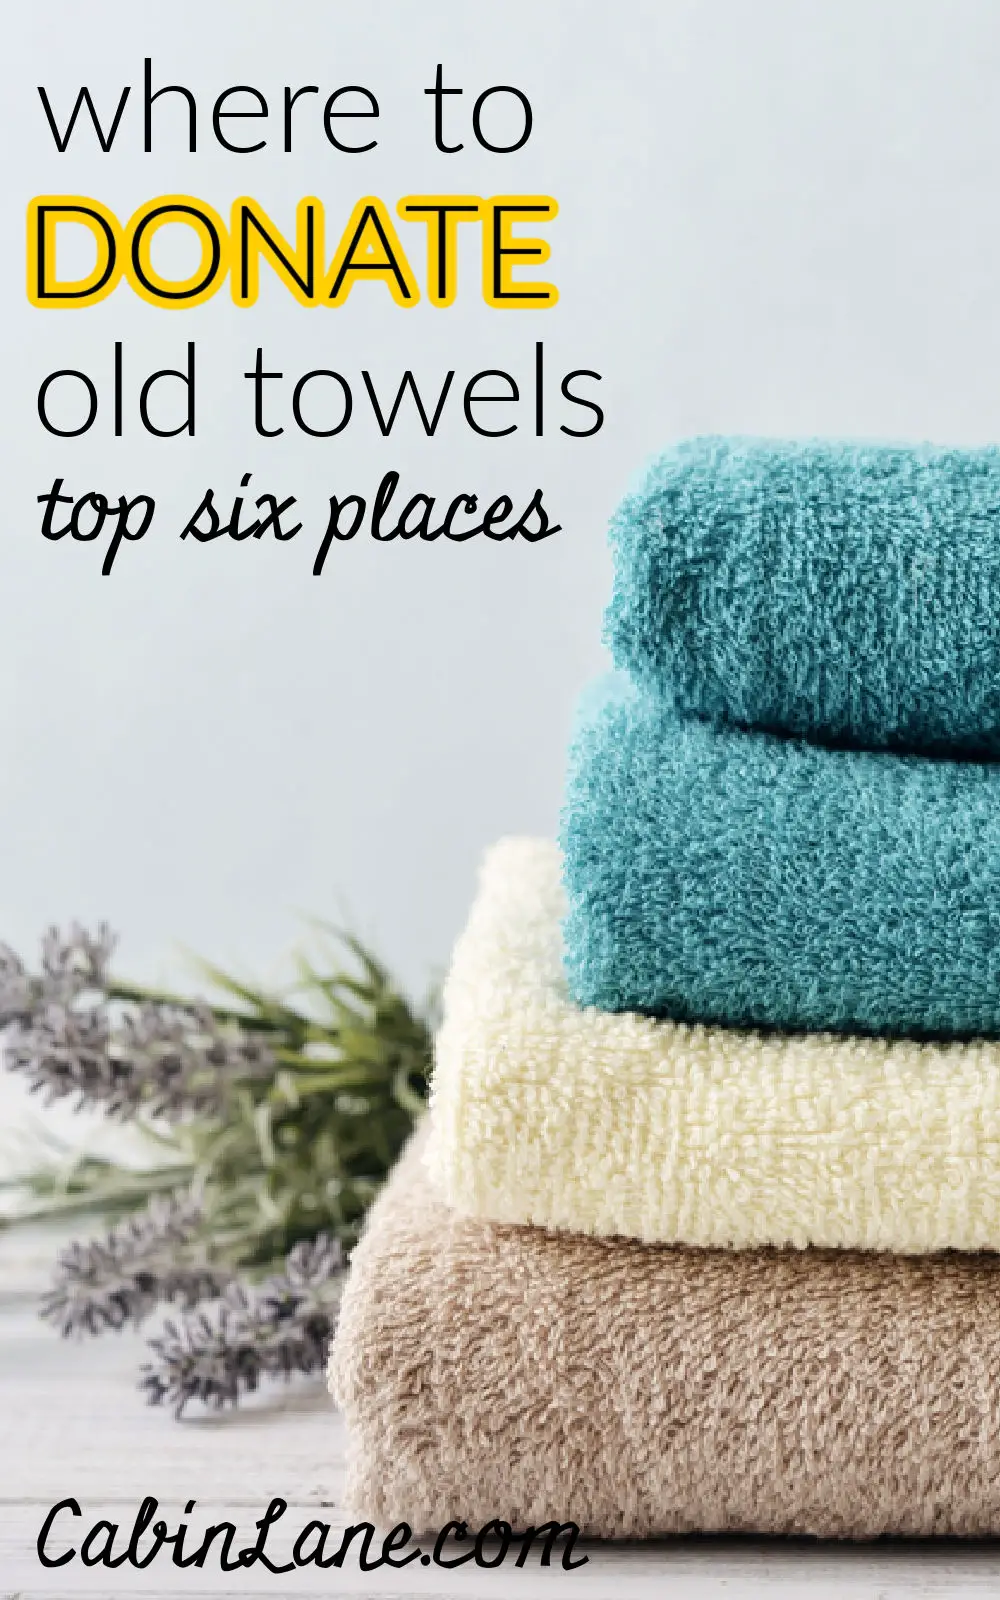 Where to Donate Old Towels: Top 6 Places - Cabin Lane